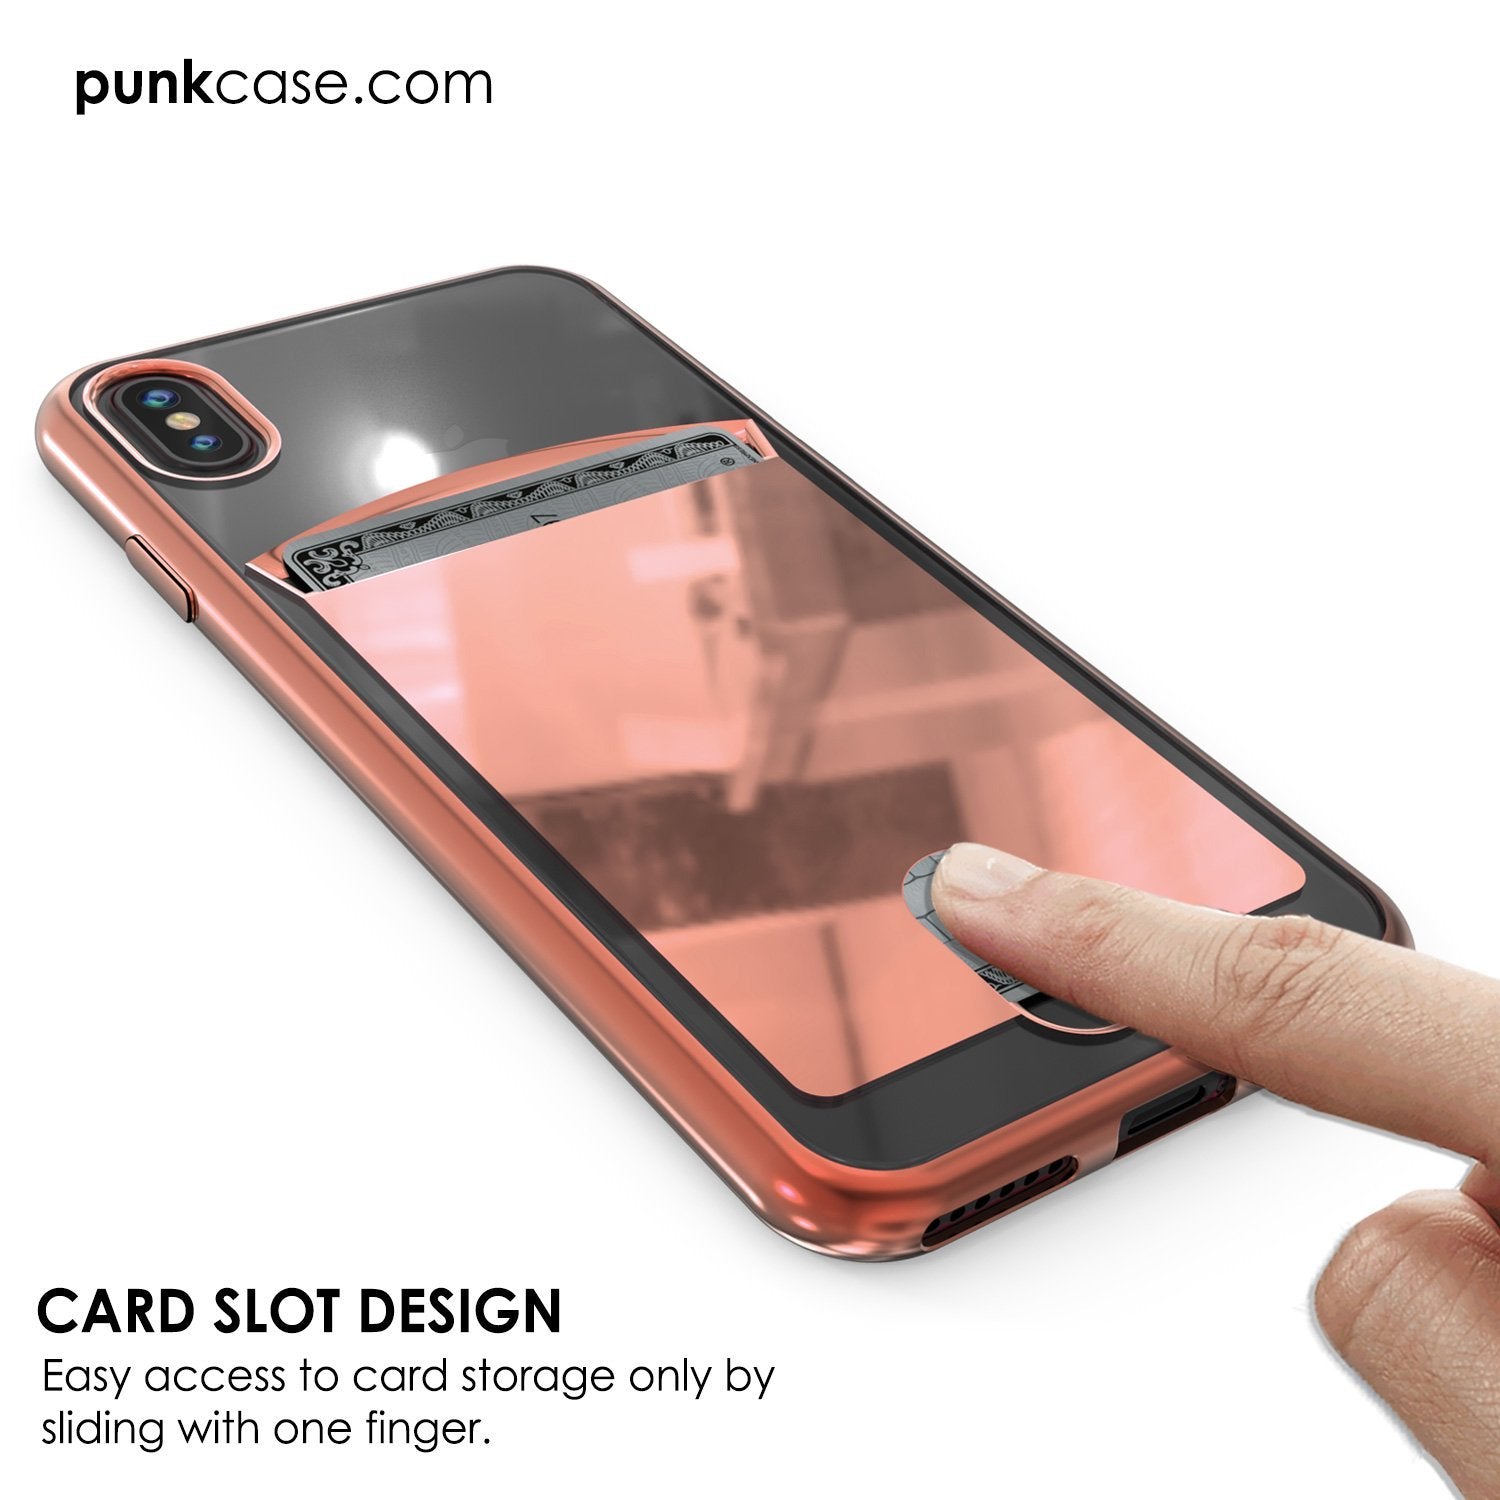 iPhone X Case, PUNKcase [LUCID Series] Slim Fit Protective Dual Layer Armor Cover W/ Scratch Resistant PUNKSHIELD Screen Protector [Rose Pink]